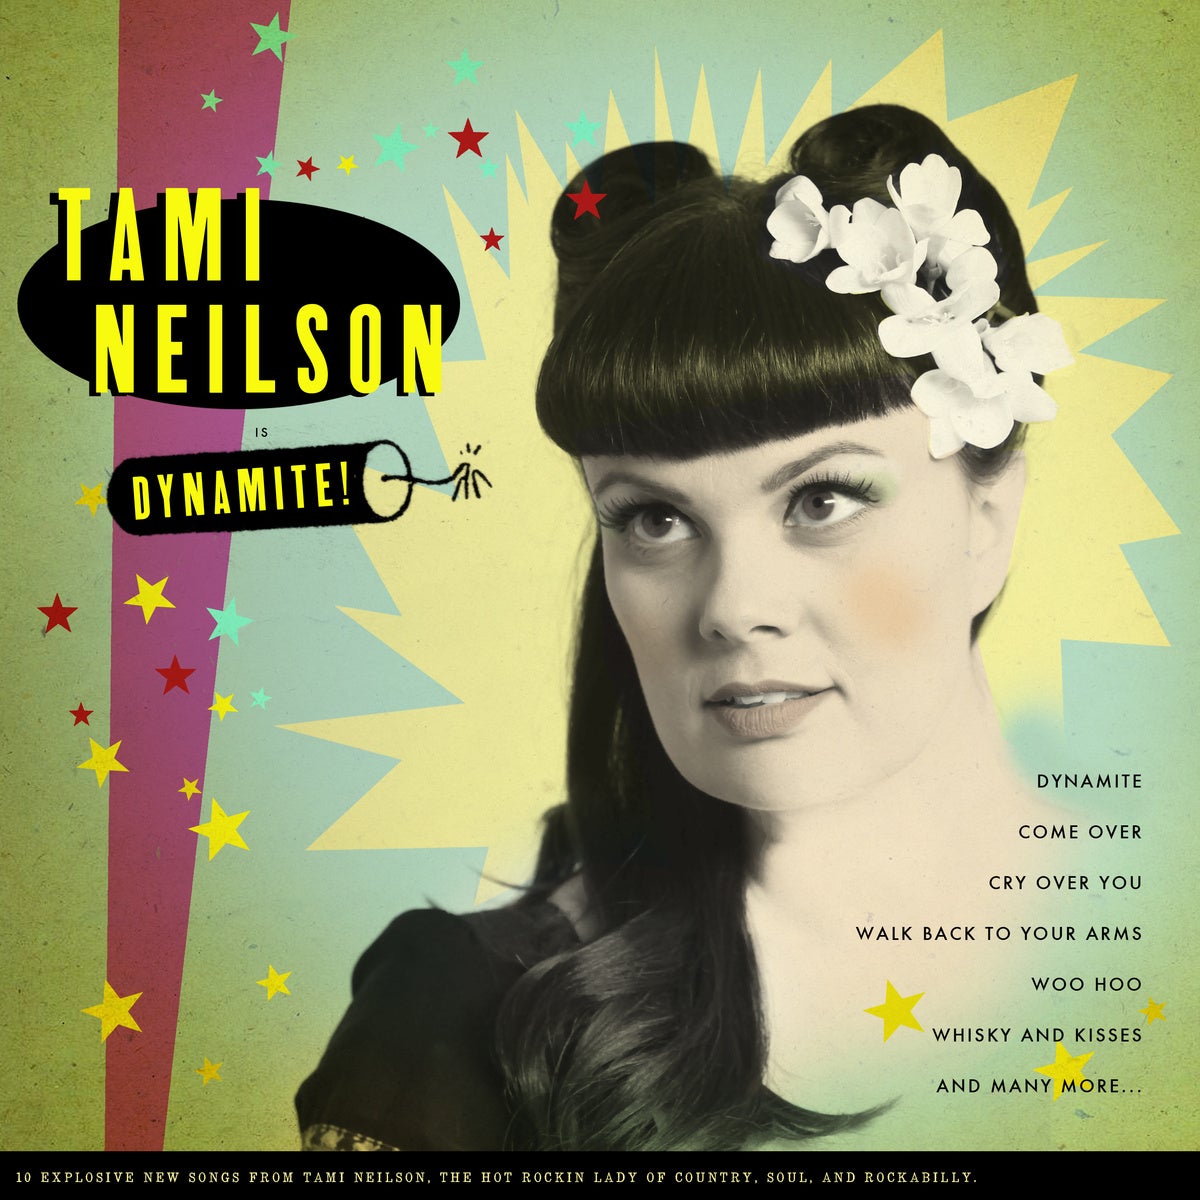 Tami Neilson, Dynamite! - album review: A short but satisfying record ...